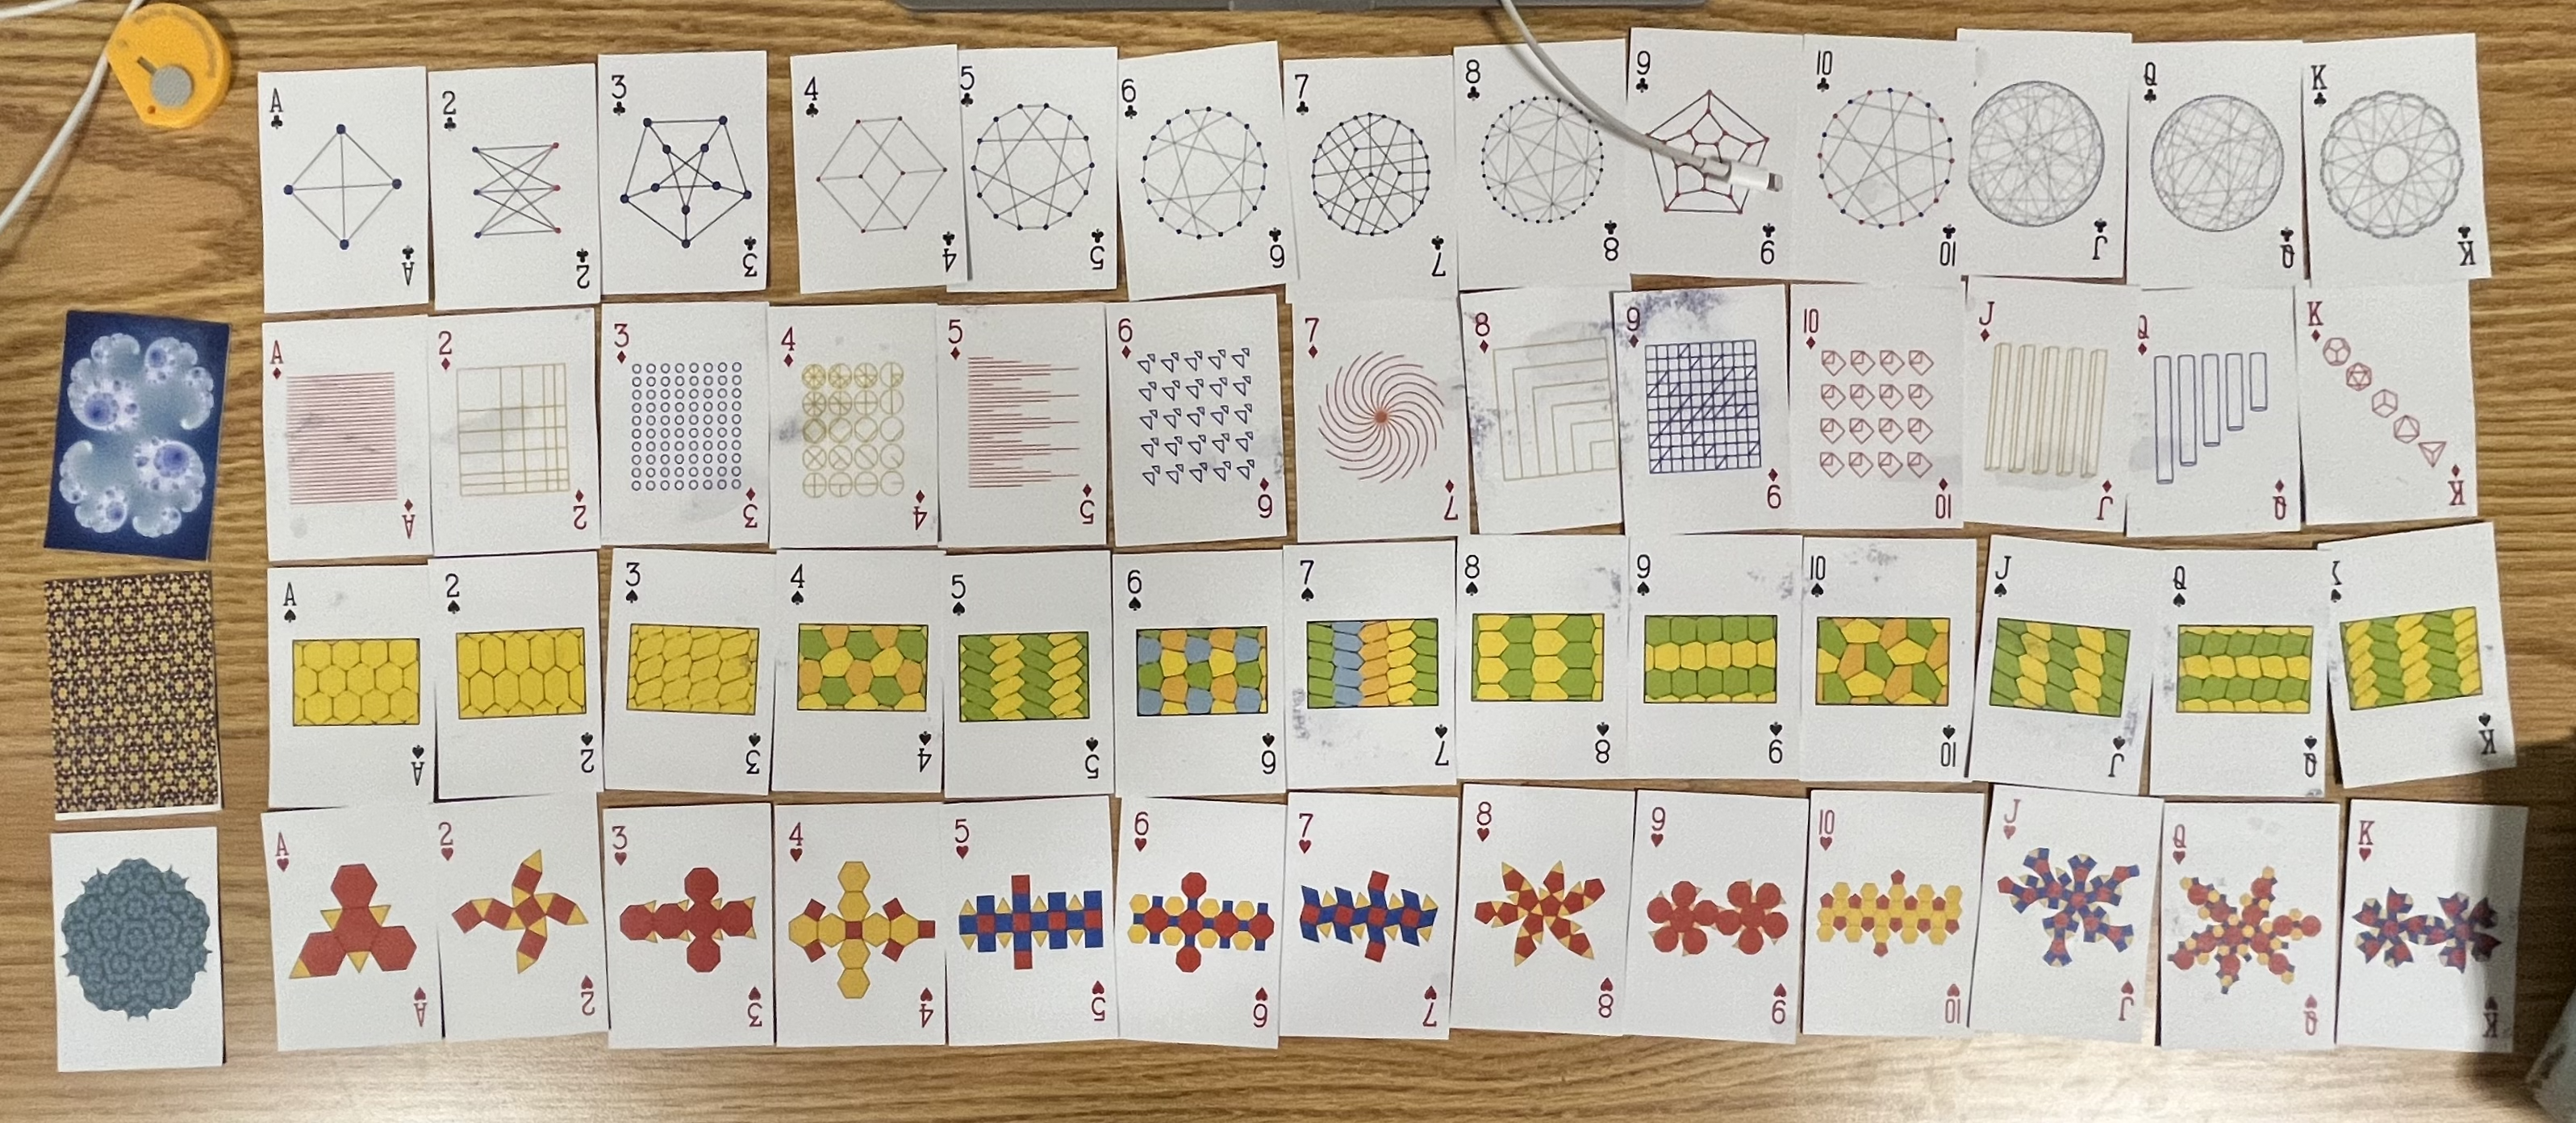 Making a Math-Themed Deck of Cards